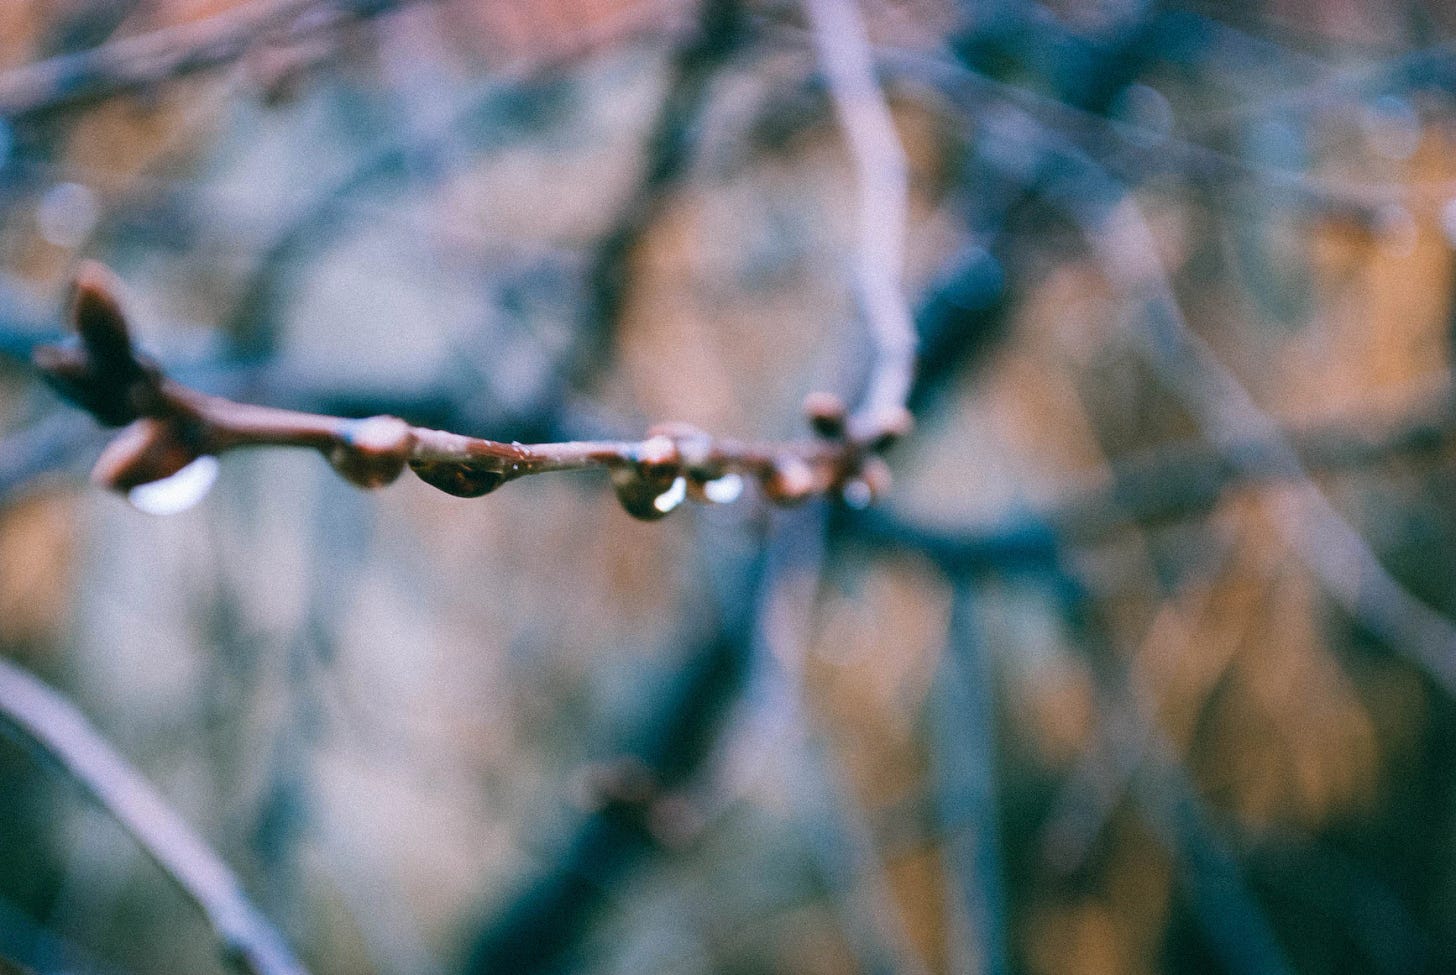 Bare dripping tree branch with buds on display 